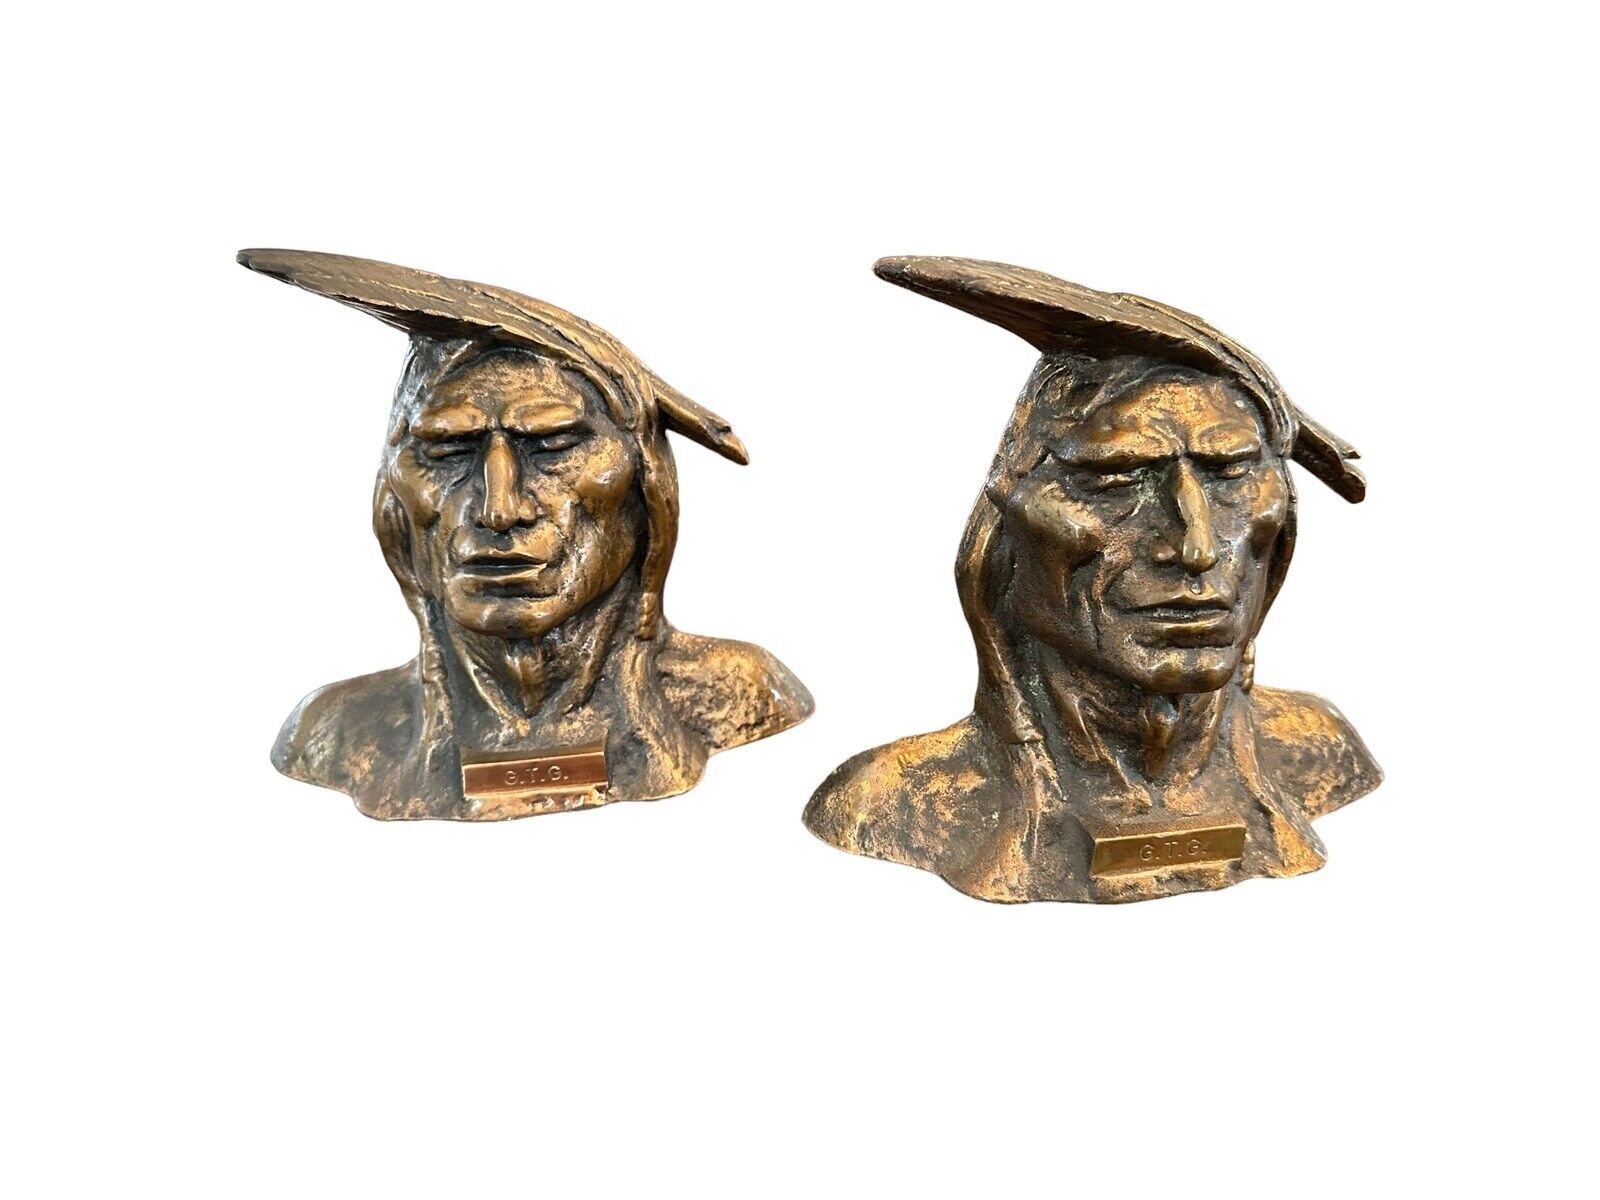 Rare Stunning Antique Pair of Bronze Native American Indian Warrior Bookends